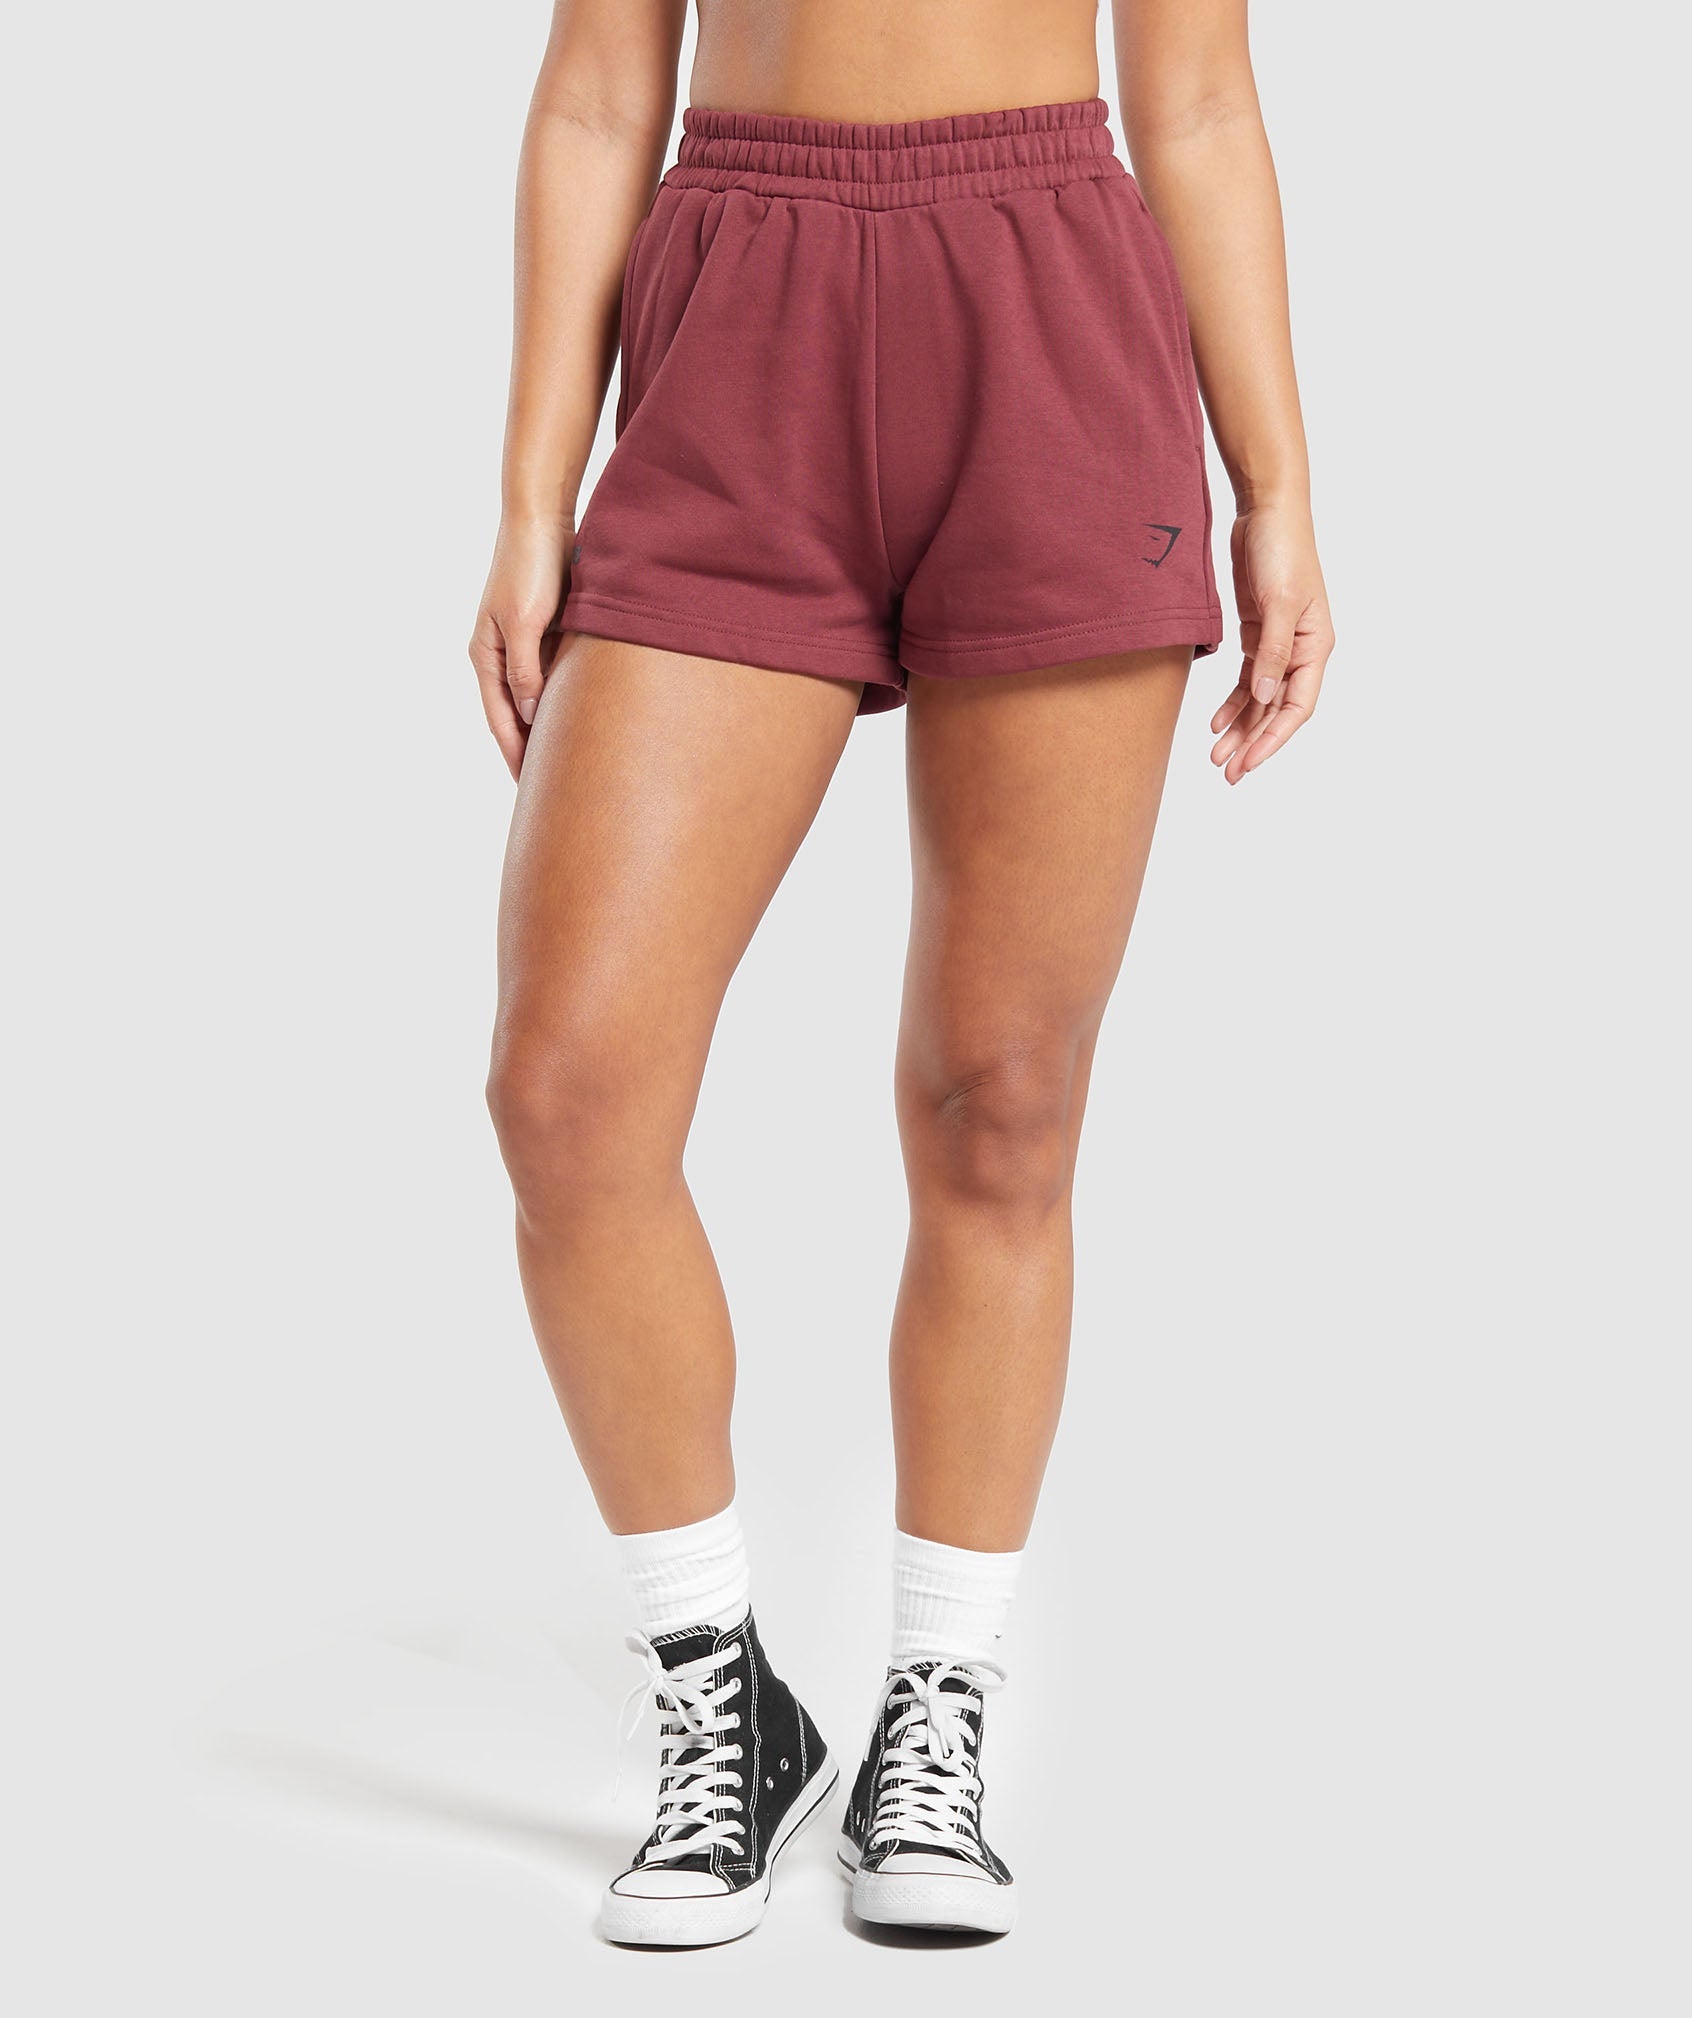 Built Graphic Shorts in Washed Burgundy - view 2